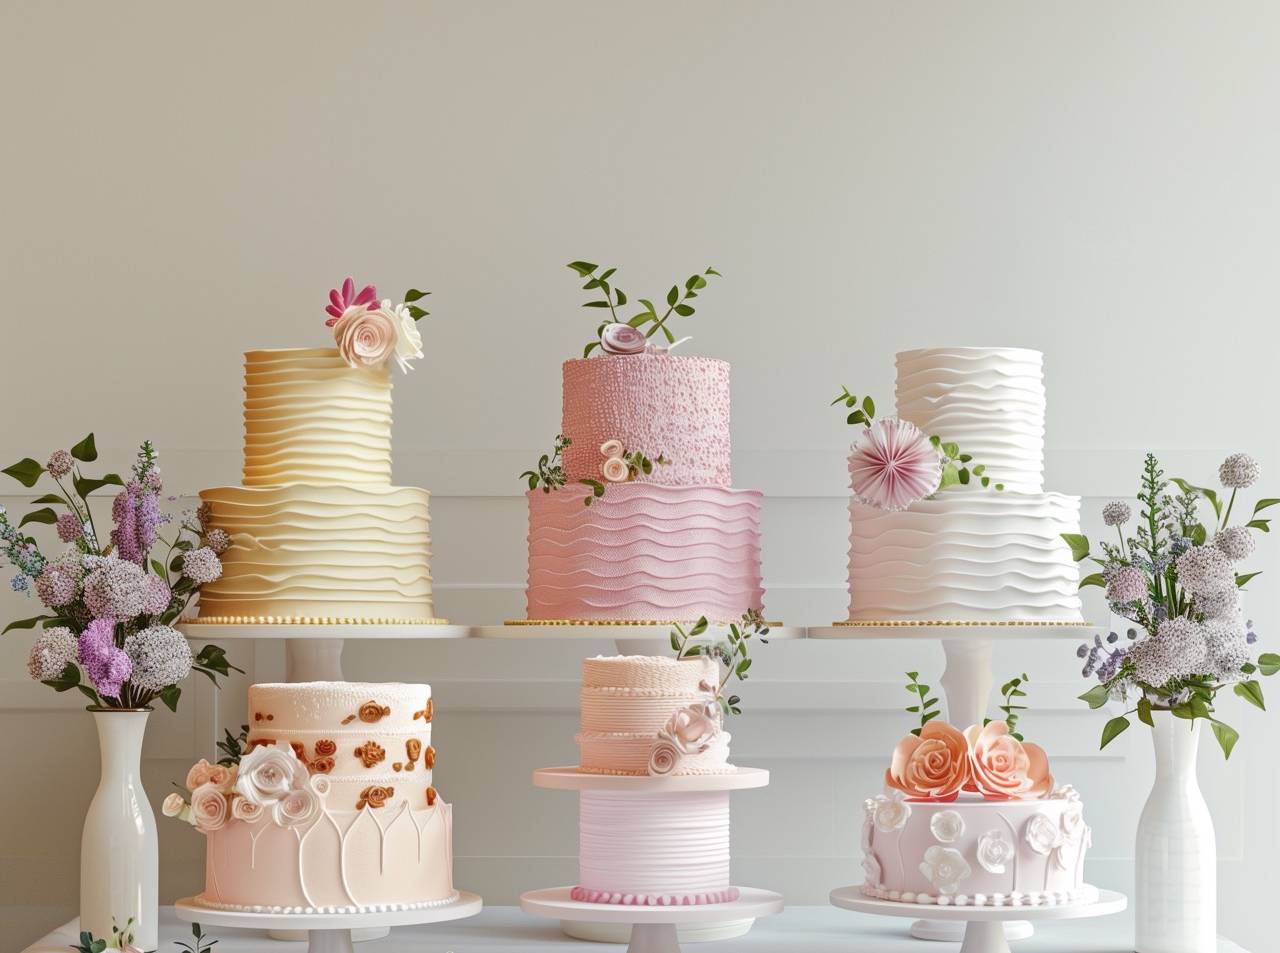 Several tiered cakes with flowers

Description automatically generated